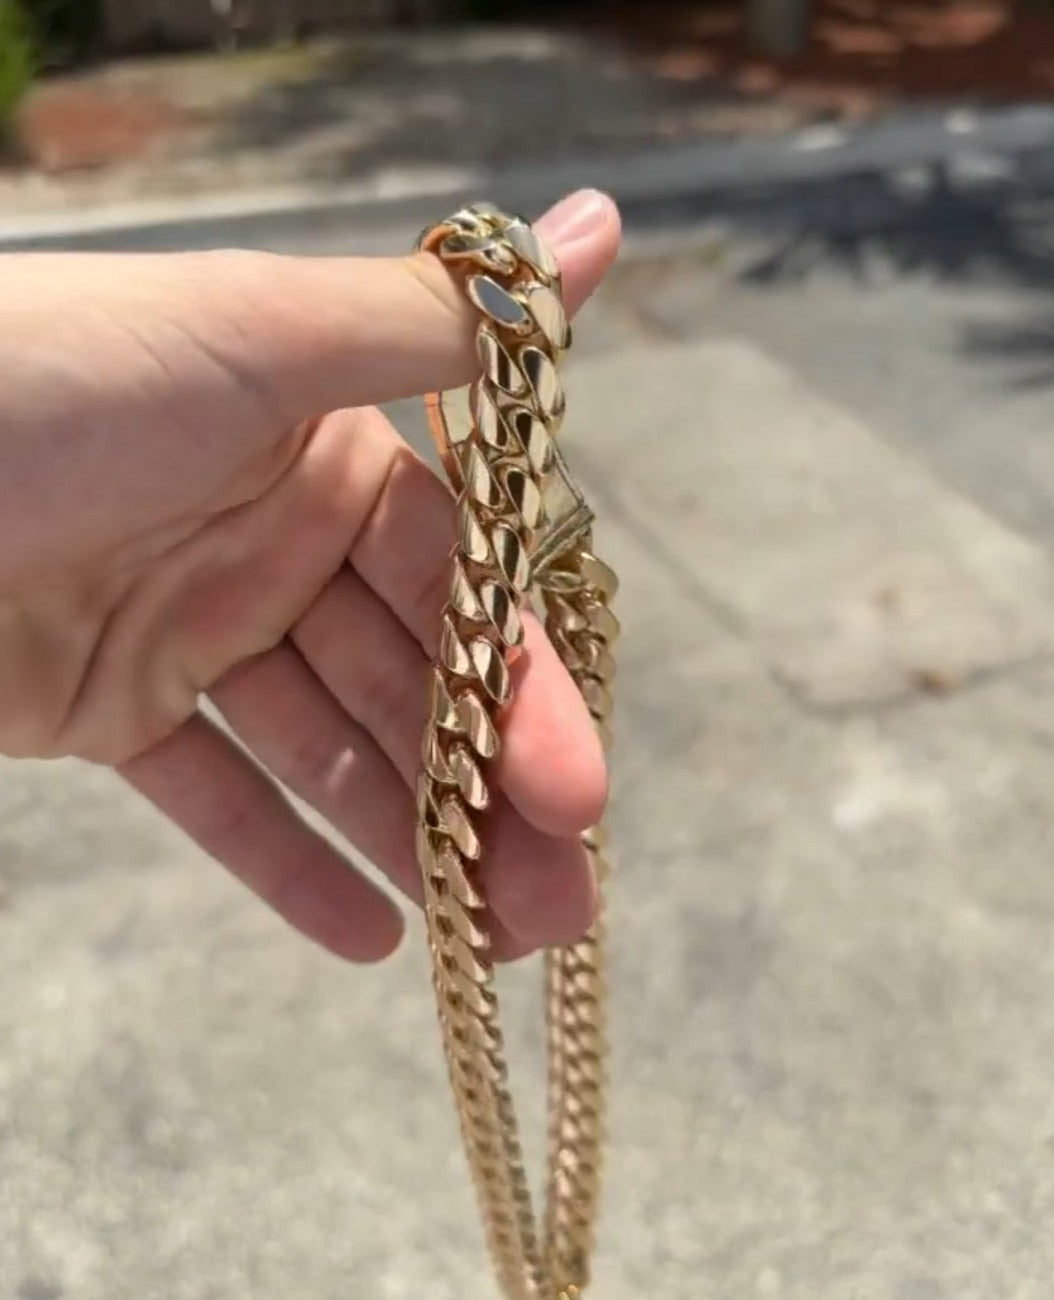 RARE PRINCE by CARAT SUTRA | Custom 12mm Solid Miami Cuban Link Chain with Curved Iced Lock | 22kt Gold Micron Plated 925 Sterling Silver Chain | Men's Jewelry | With Certificate of Authenticity and 925 Hallmark